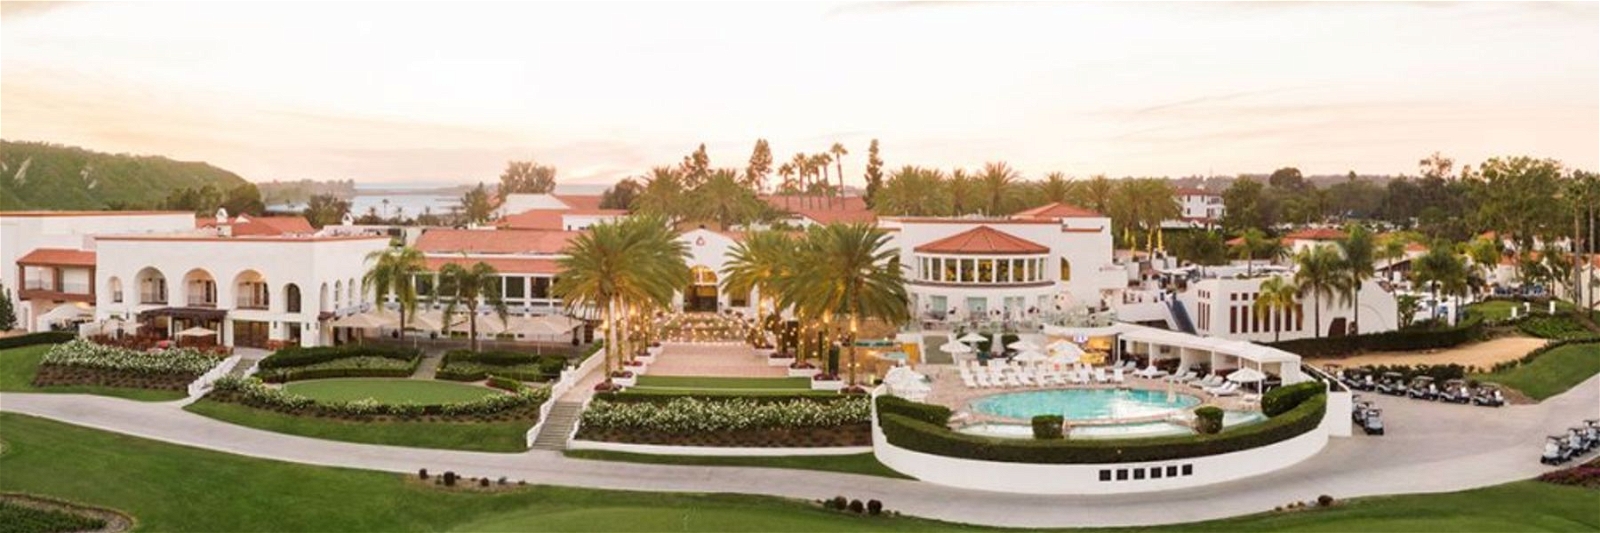 Golf Vacation Package - Omni La Costa Golf Resort - Stay and Play from $525!